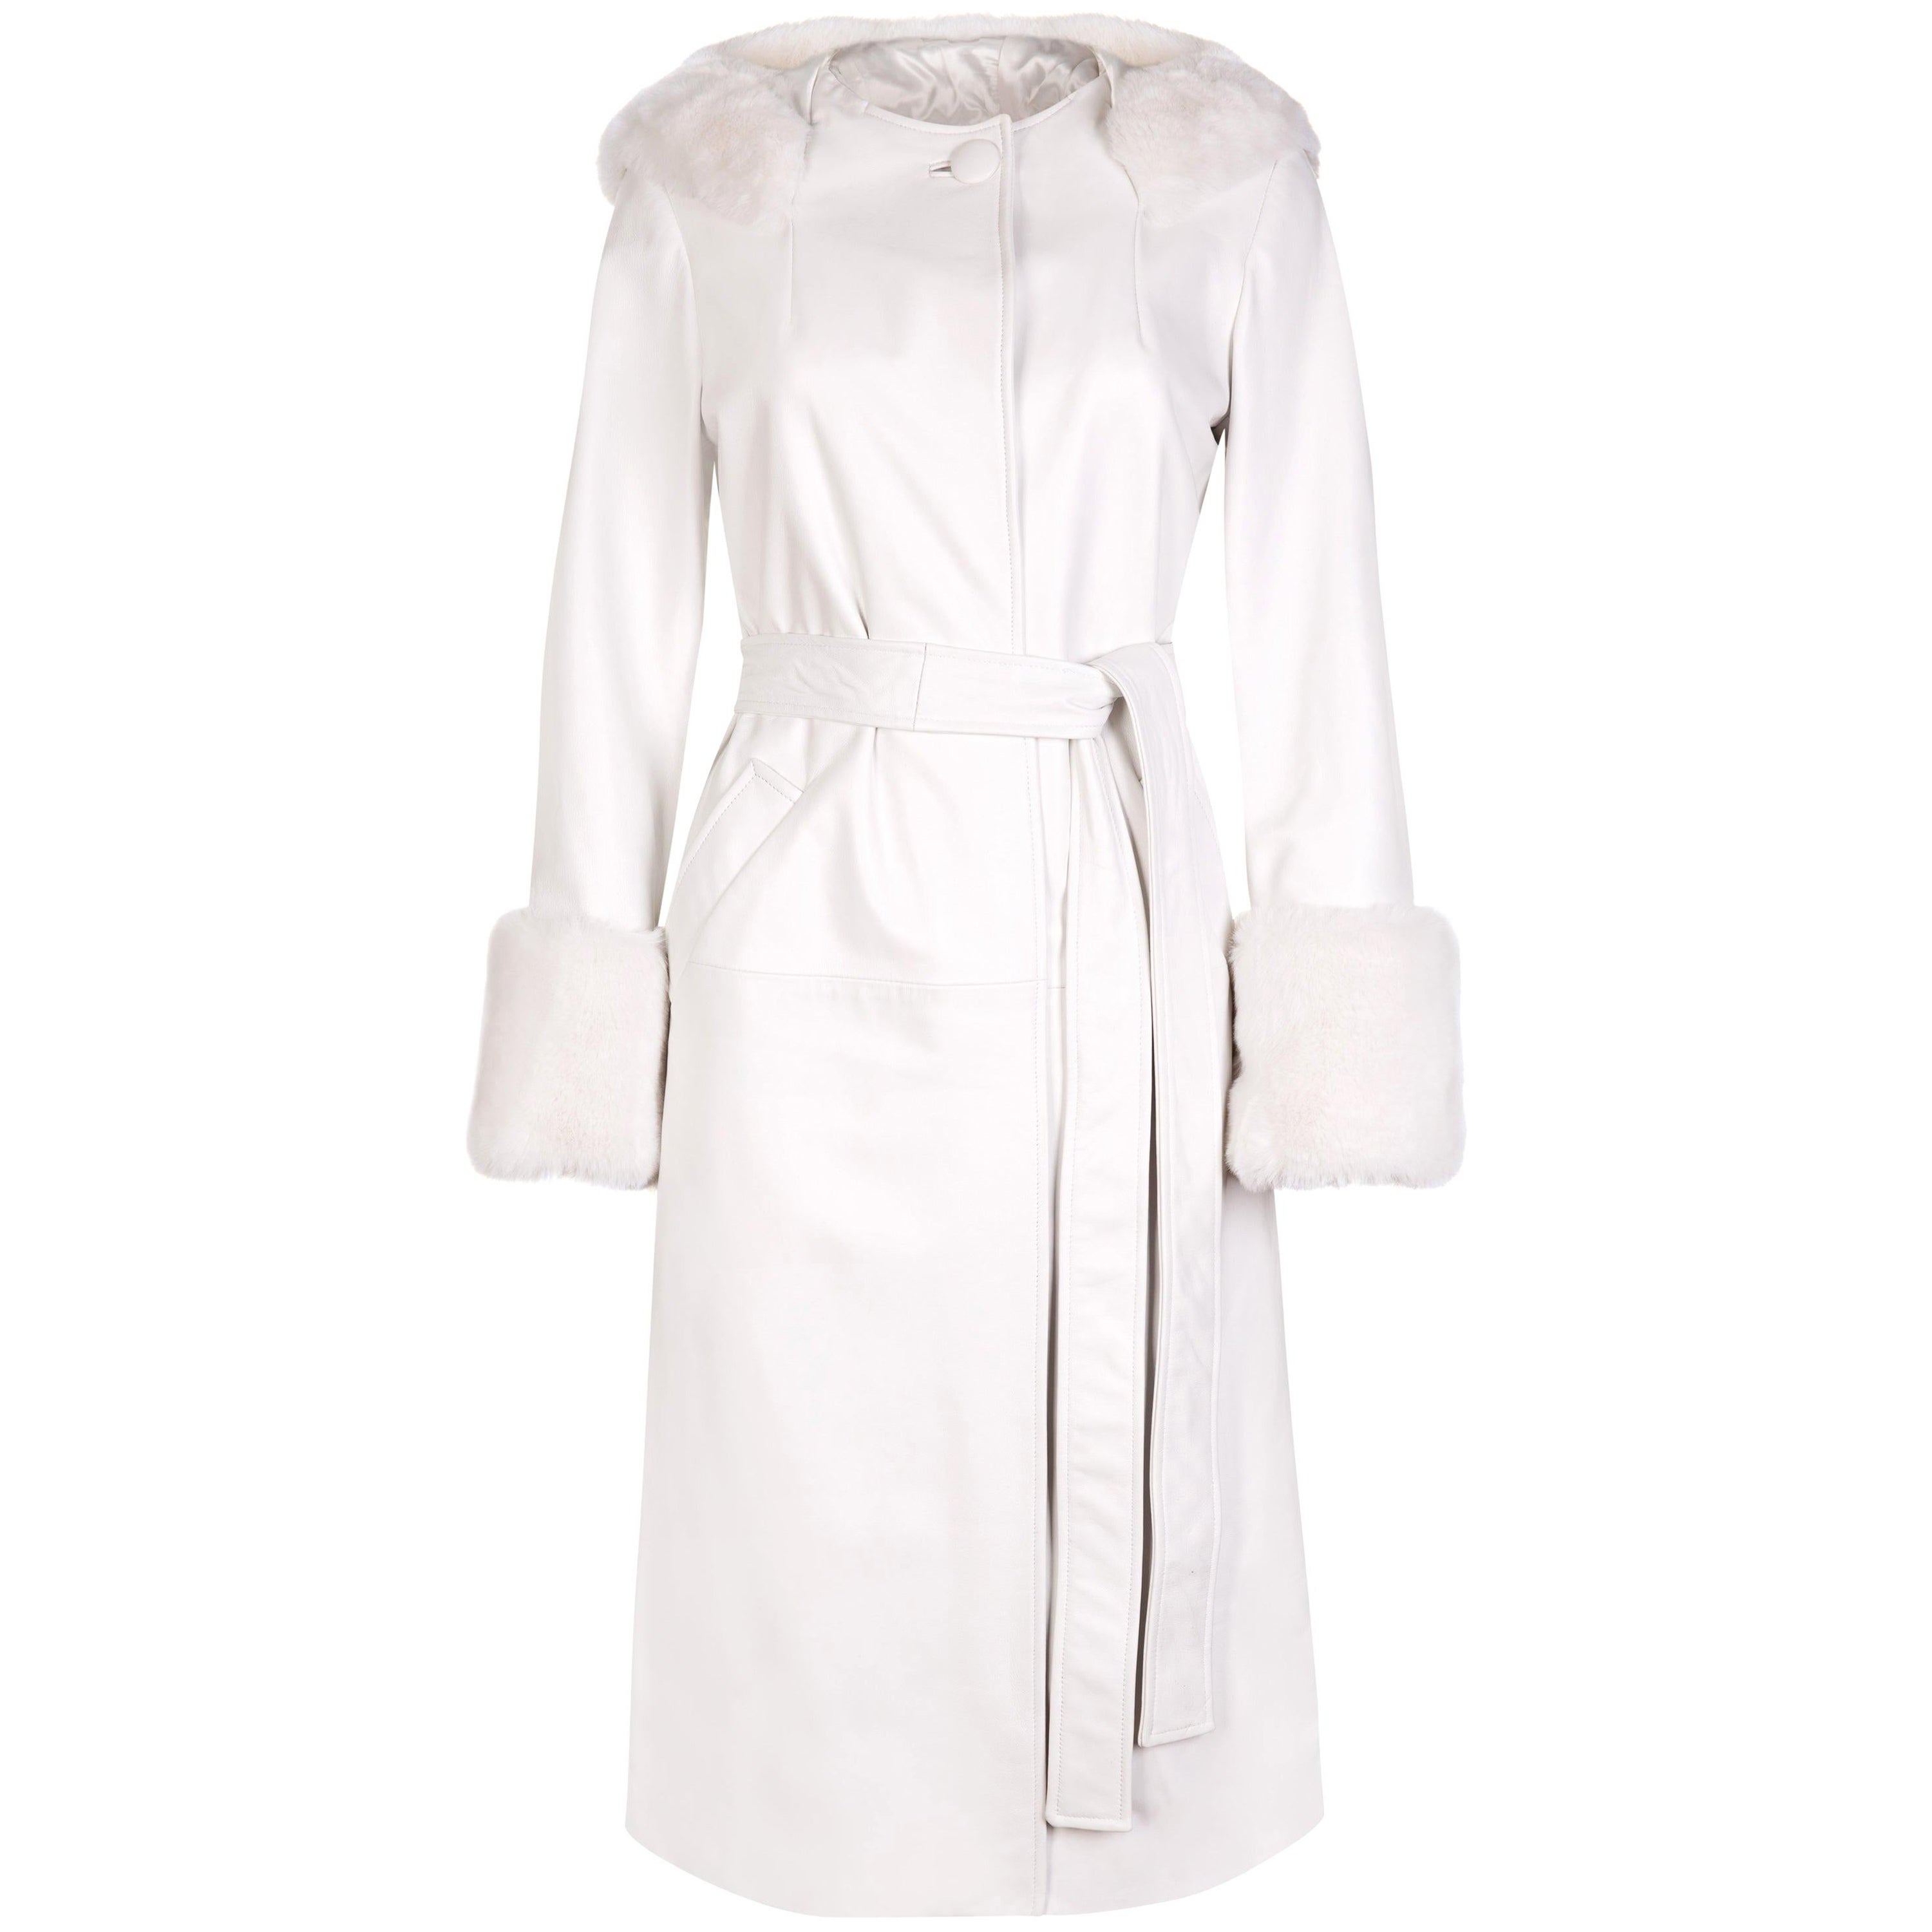 Verheyen Aurora Hooded Leather Trench Coat in White with Faux Fur - Size uk 10 For Sale